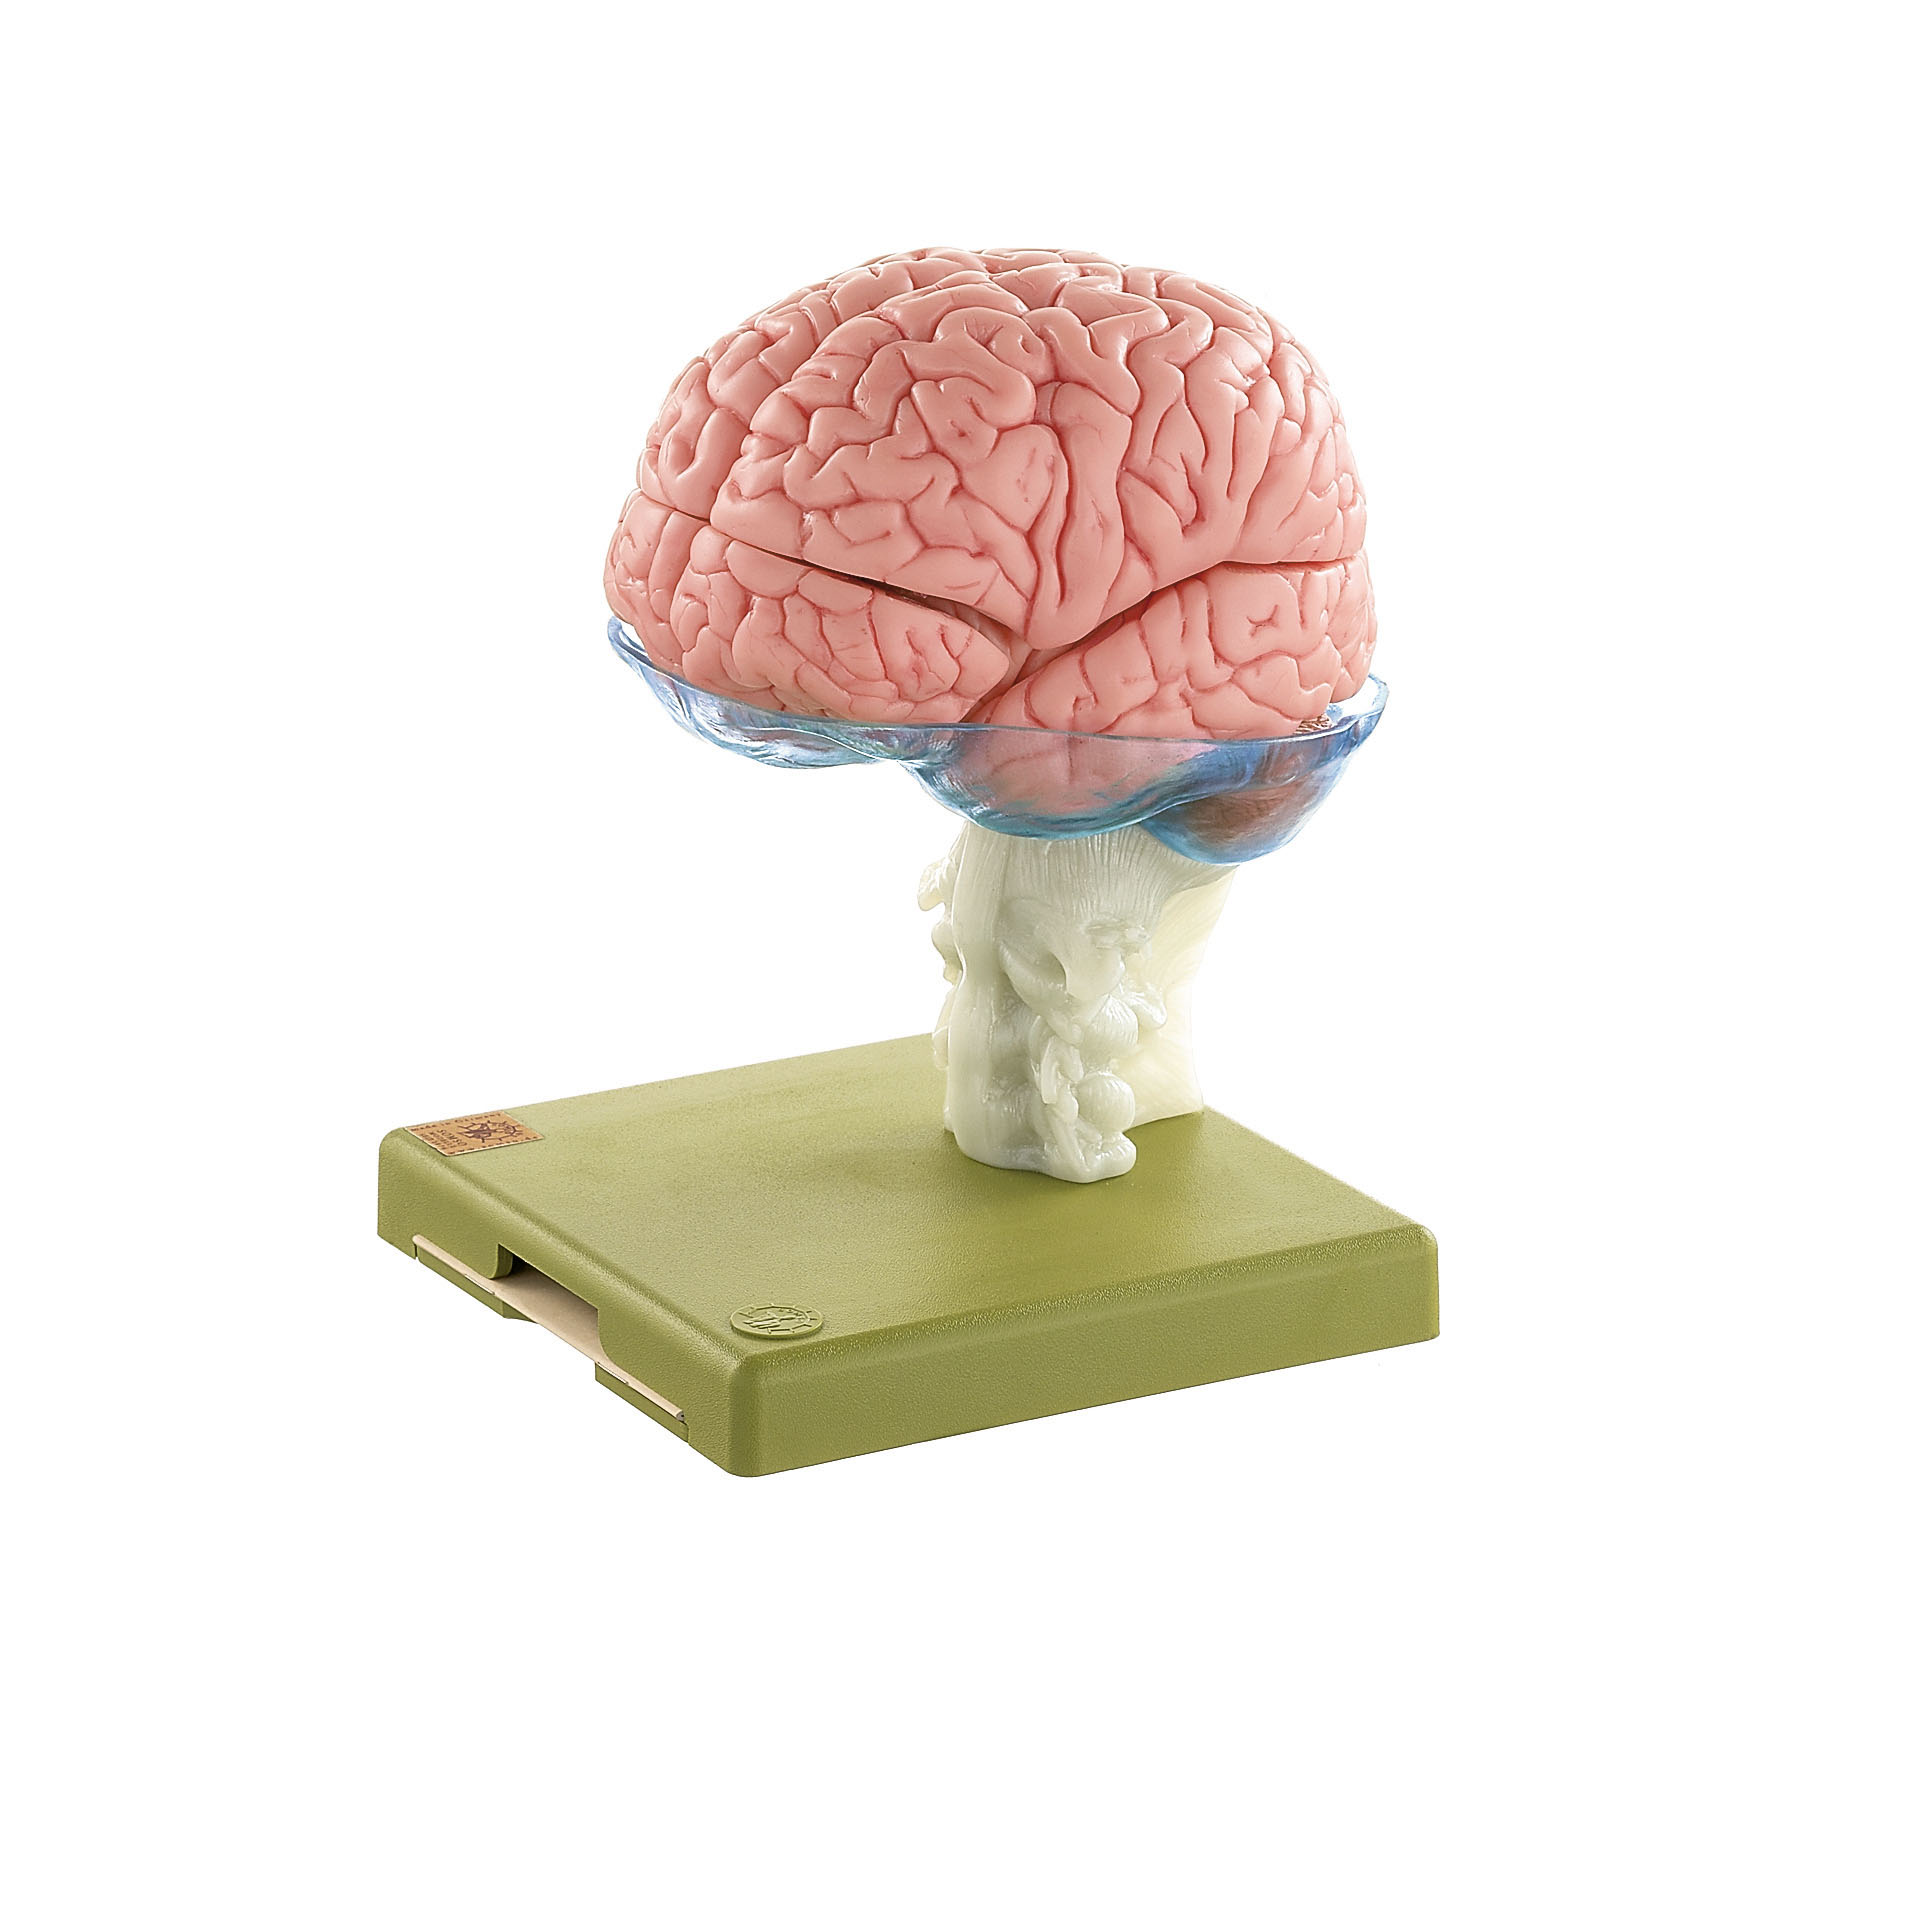 Model of Brain – Separates Into 15 Parts